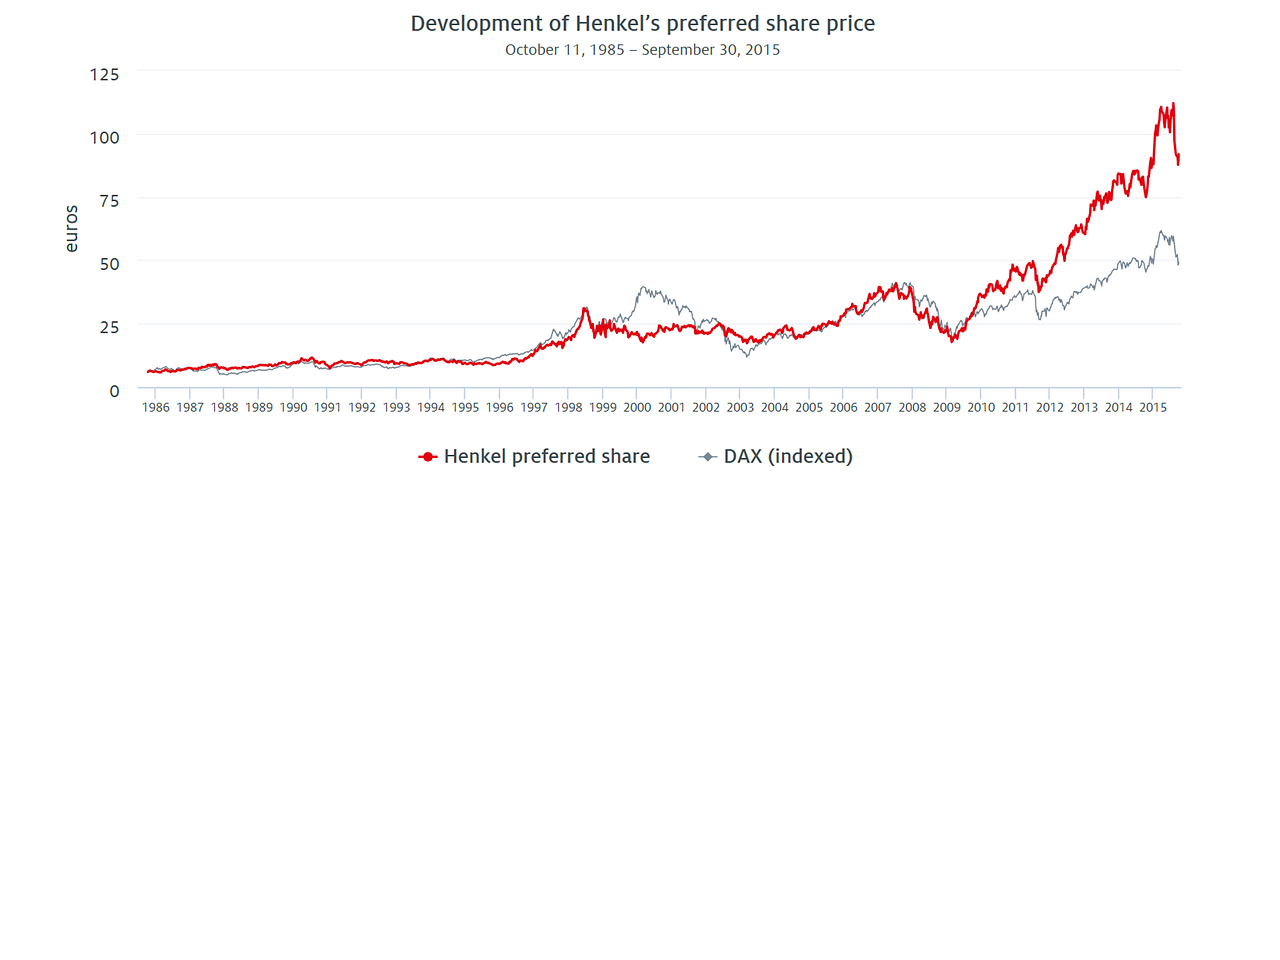 Development of Henkel’s preferred share price compared to the DAX (1985 – 2015)